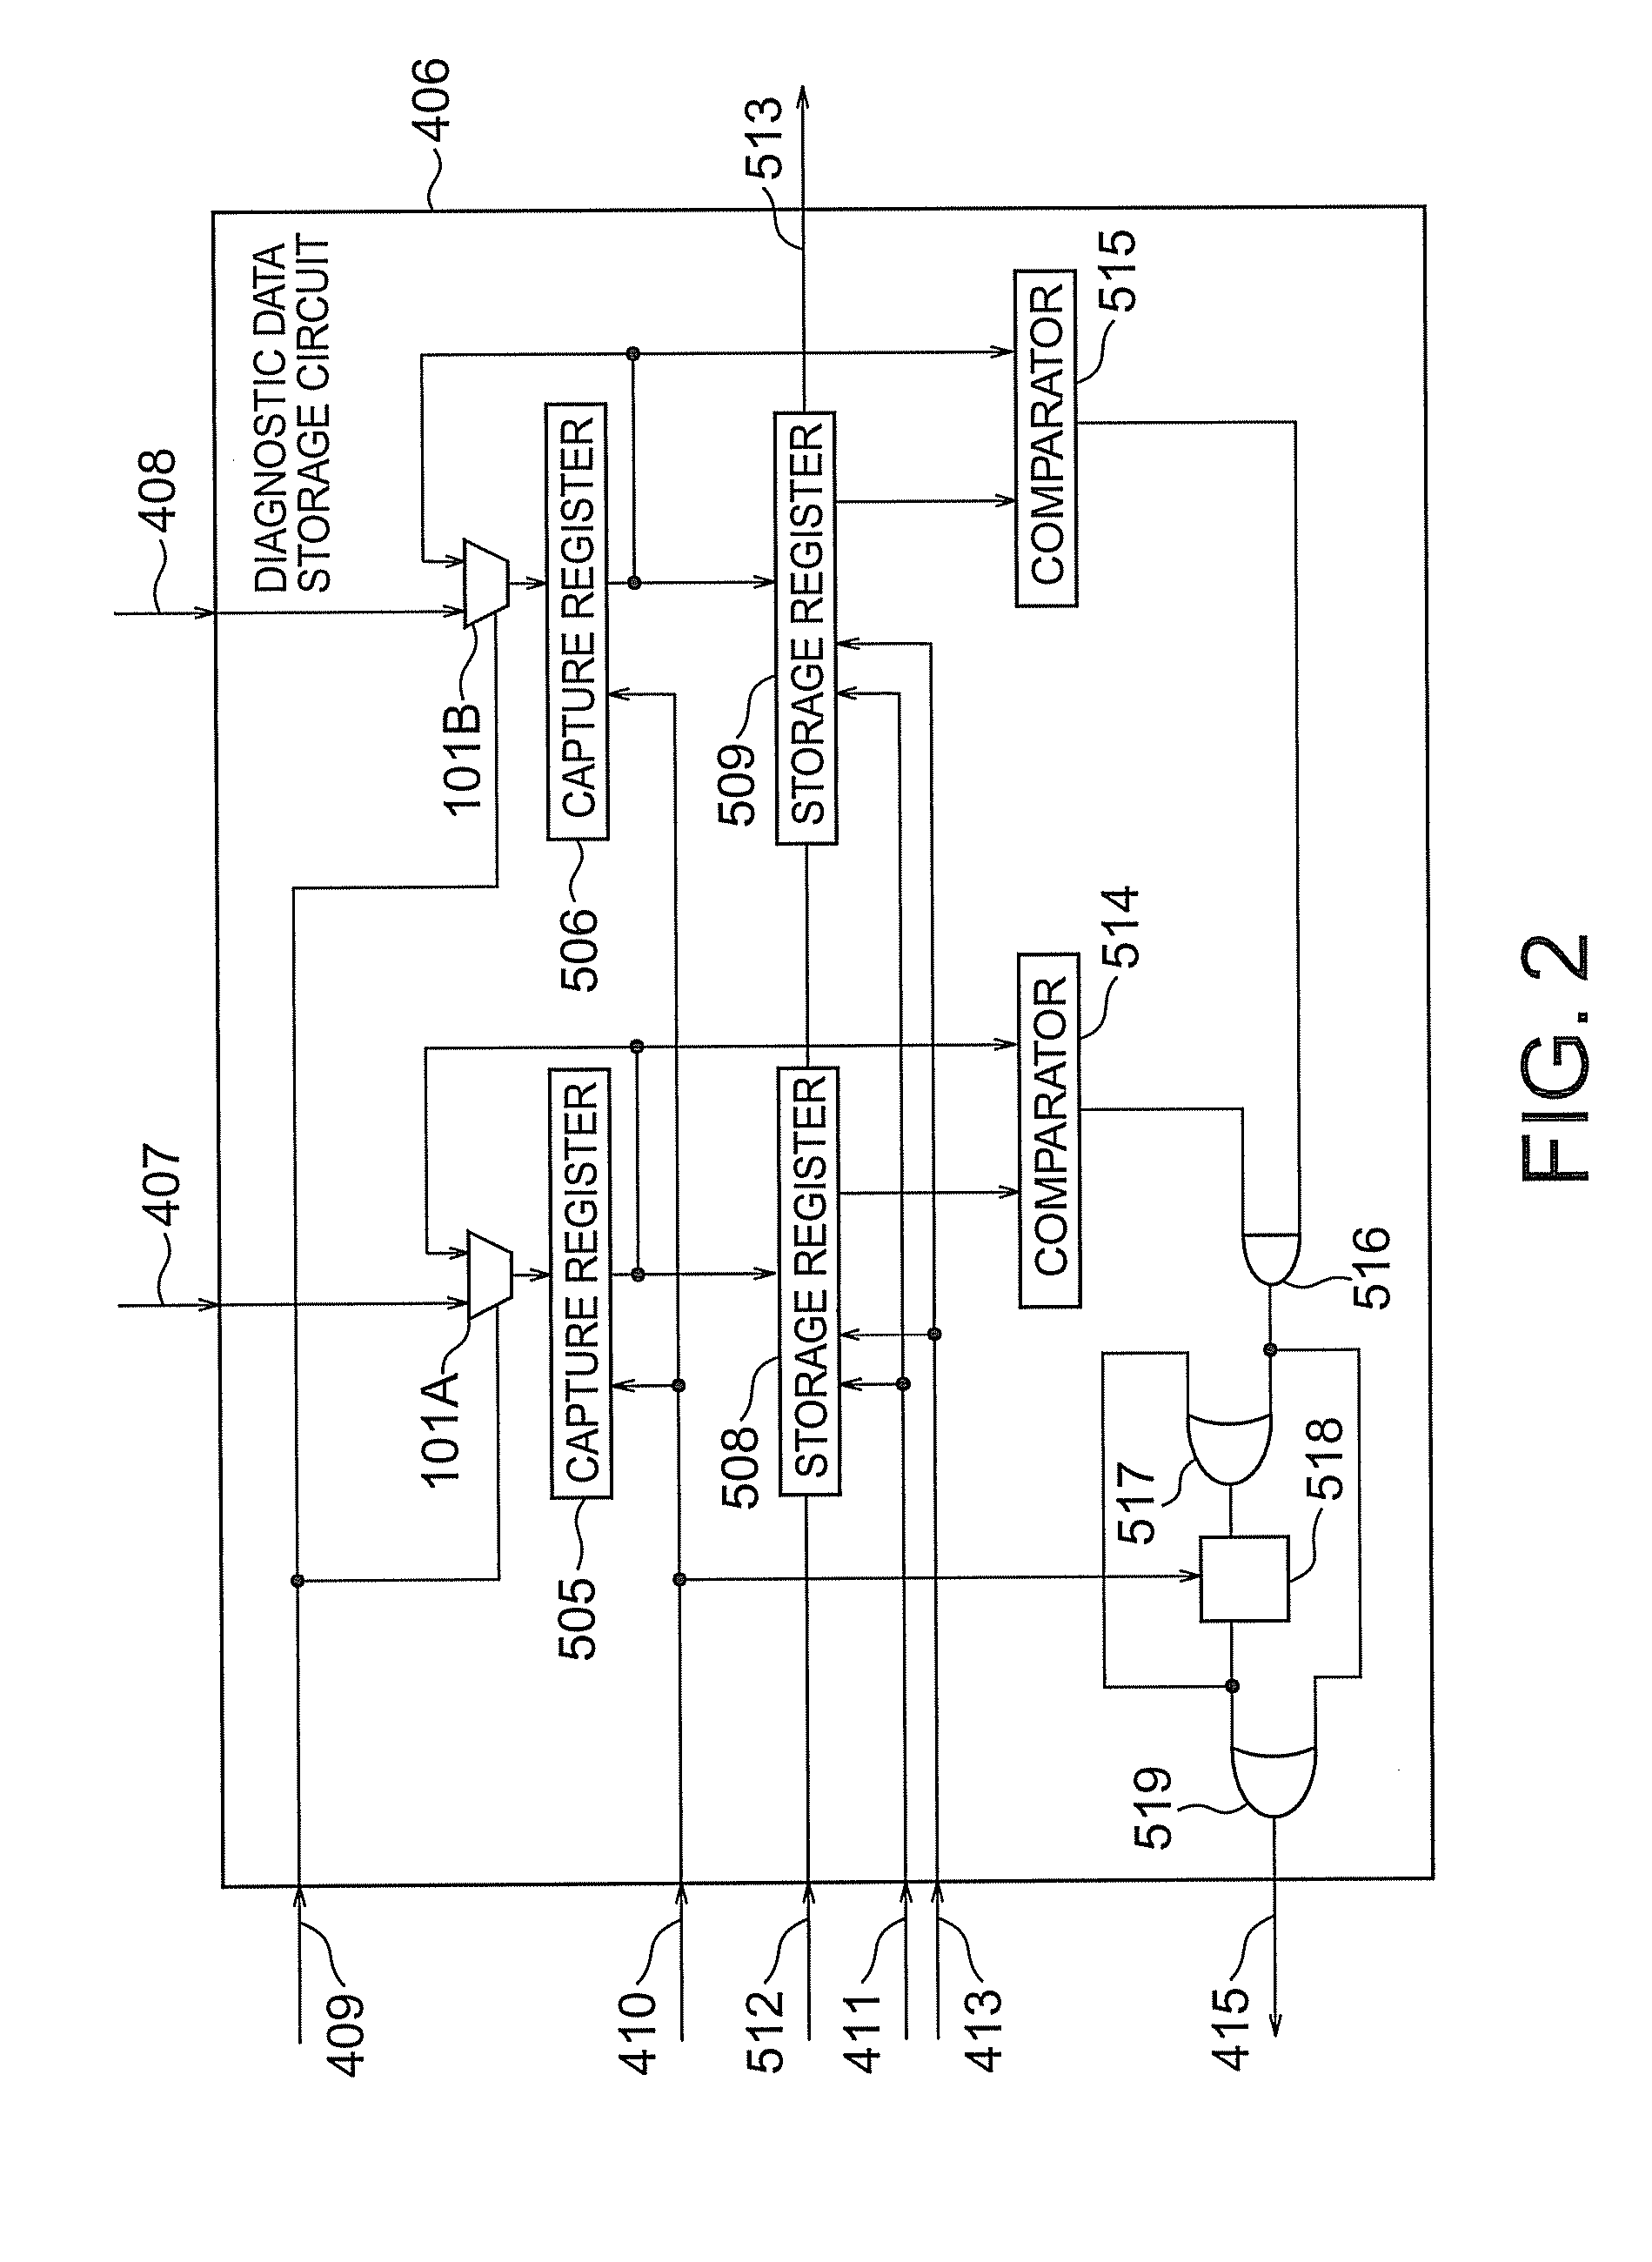 Semiconductor integrated circuit having a (BIST) built-in self test circuit for fault diagnosing operation of a memory